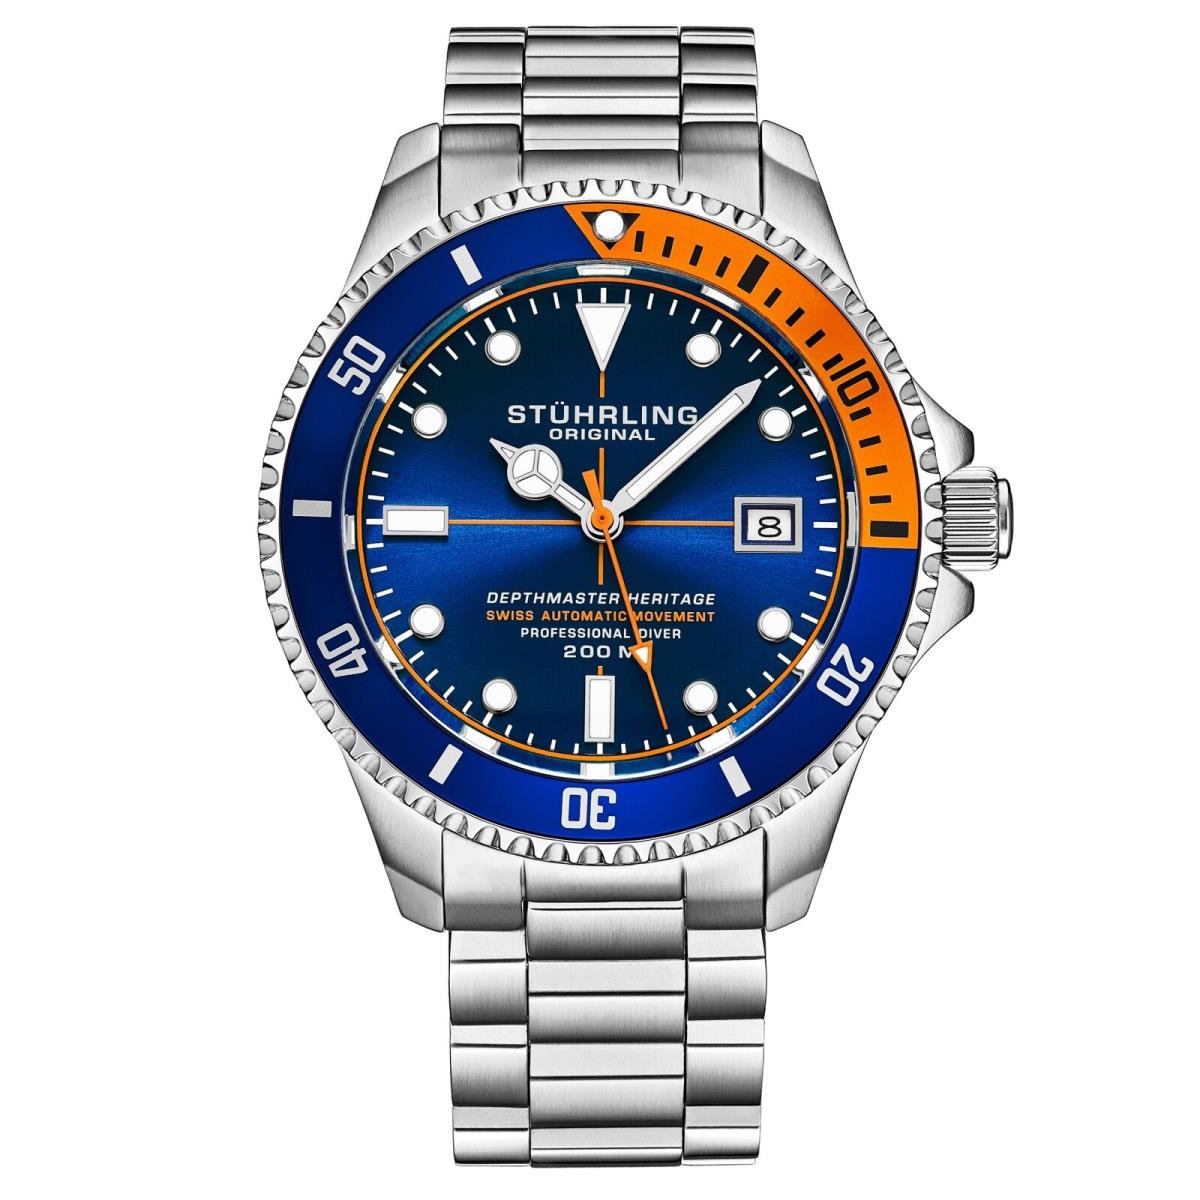 Stuhrling 883H 01 Depthmaster Swiss Automatic Diver Stainless Steel Mens Watch